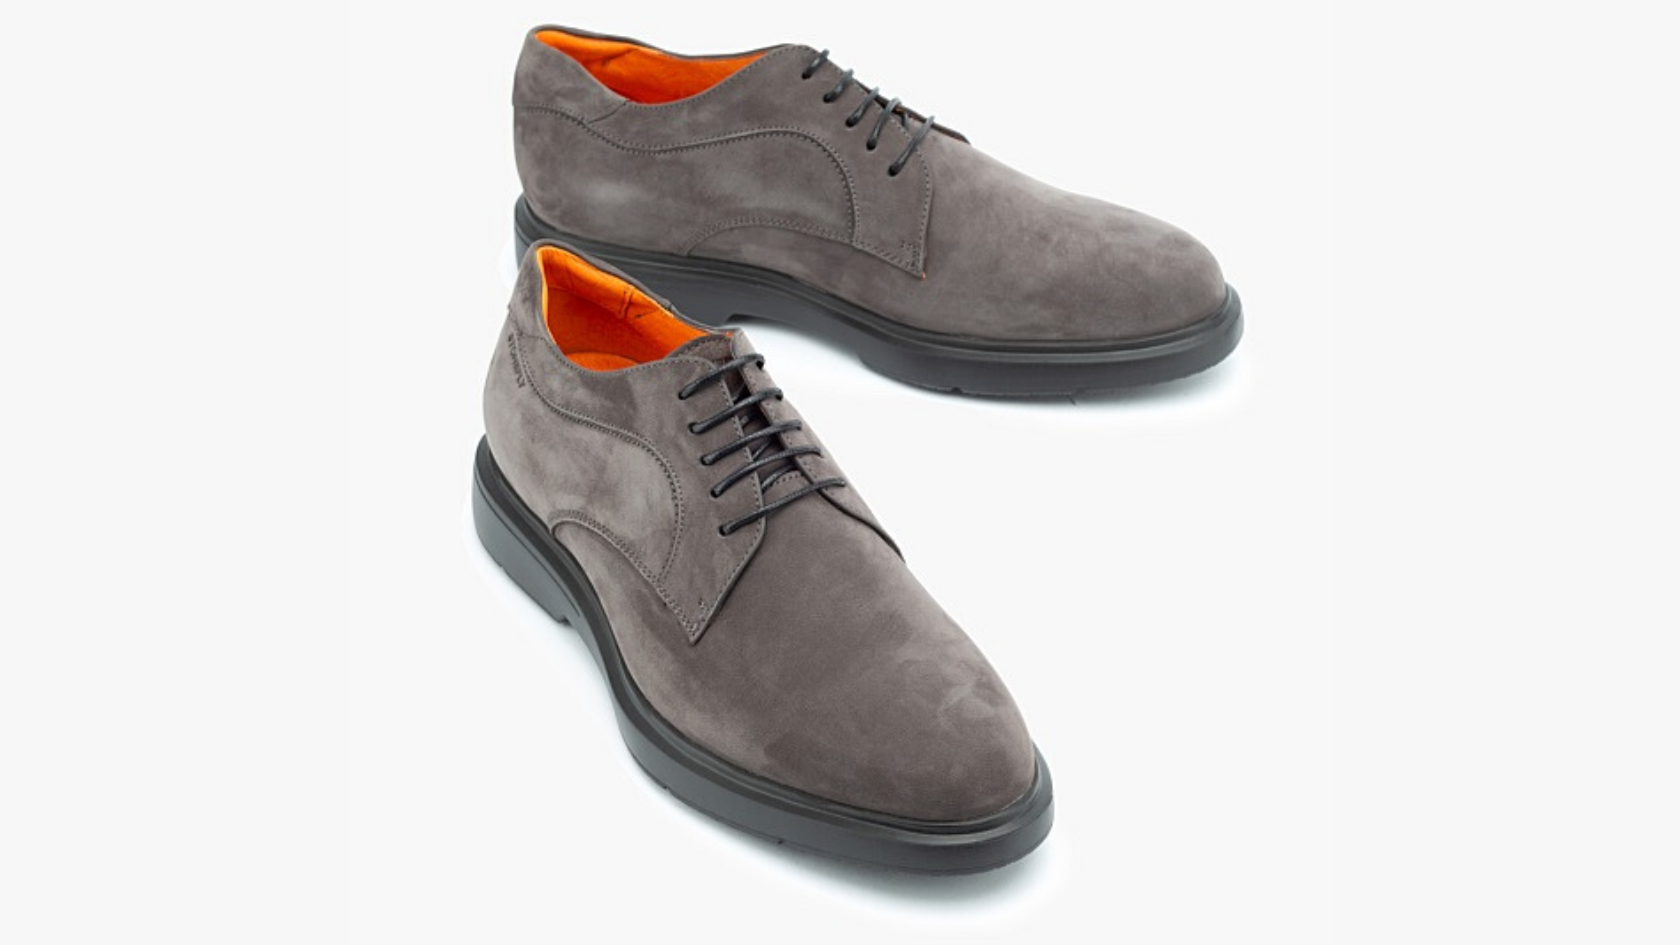 A pair of Stonefly men’s grey lace ups against a neutral background   